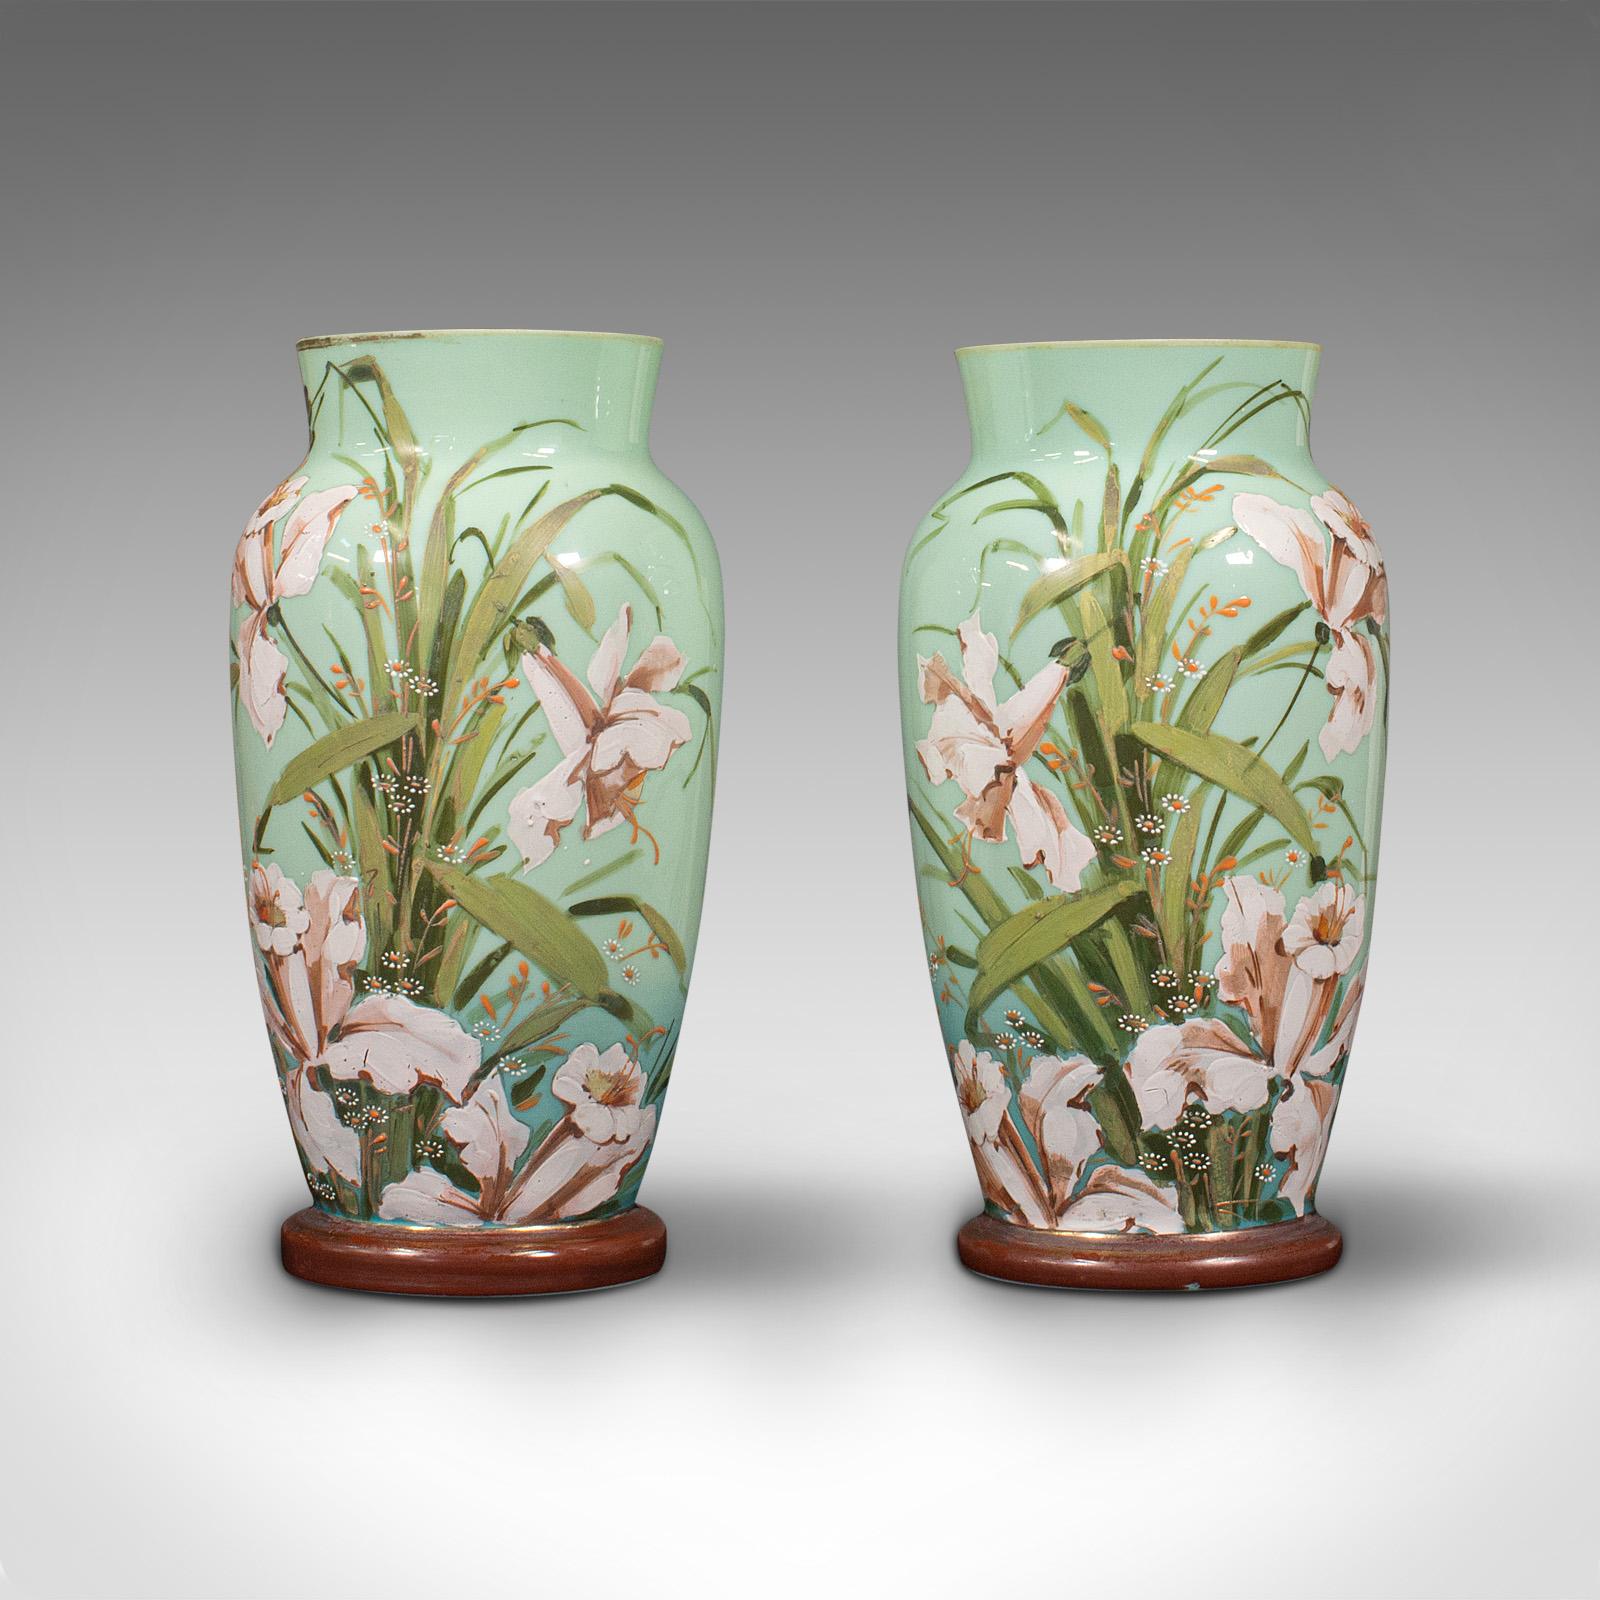 This is a pair of antique decorative vases. A Continental, opaque glass baluster, dating to the late Victorian period, circa 1900.

Appealing colour palette, handpainted upon glass
Displays a desirable aged patina and in good order
Delightful